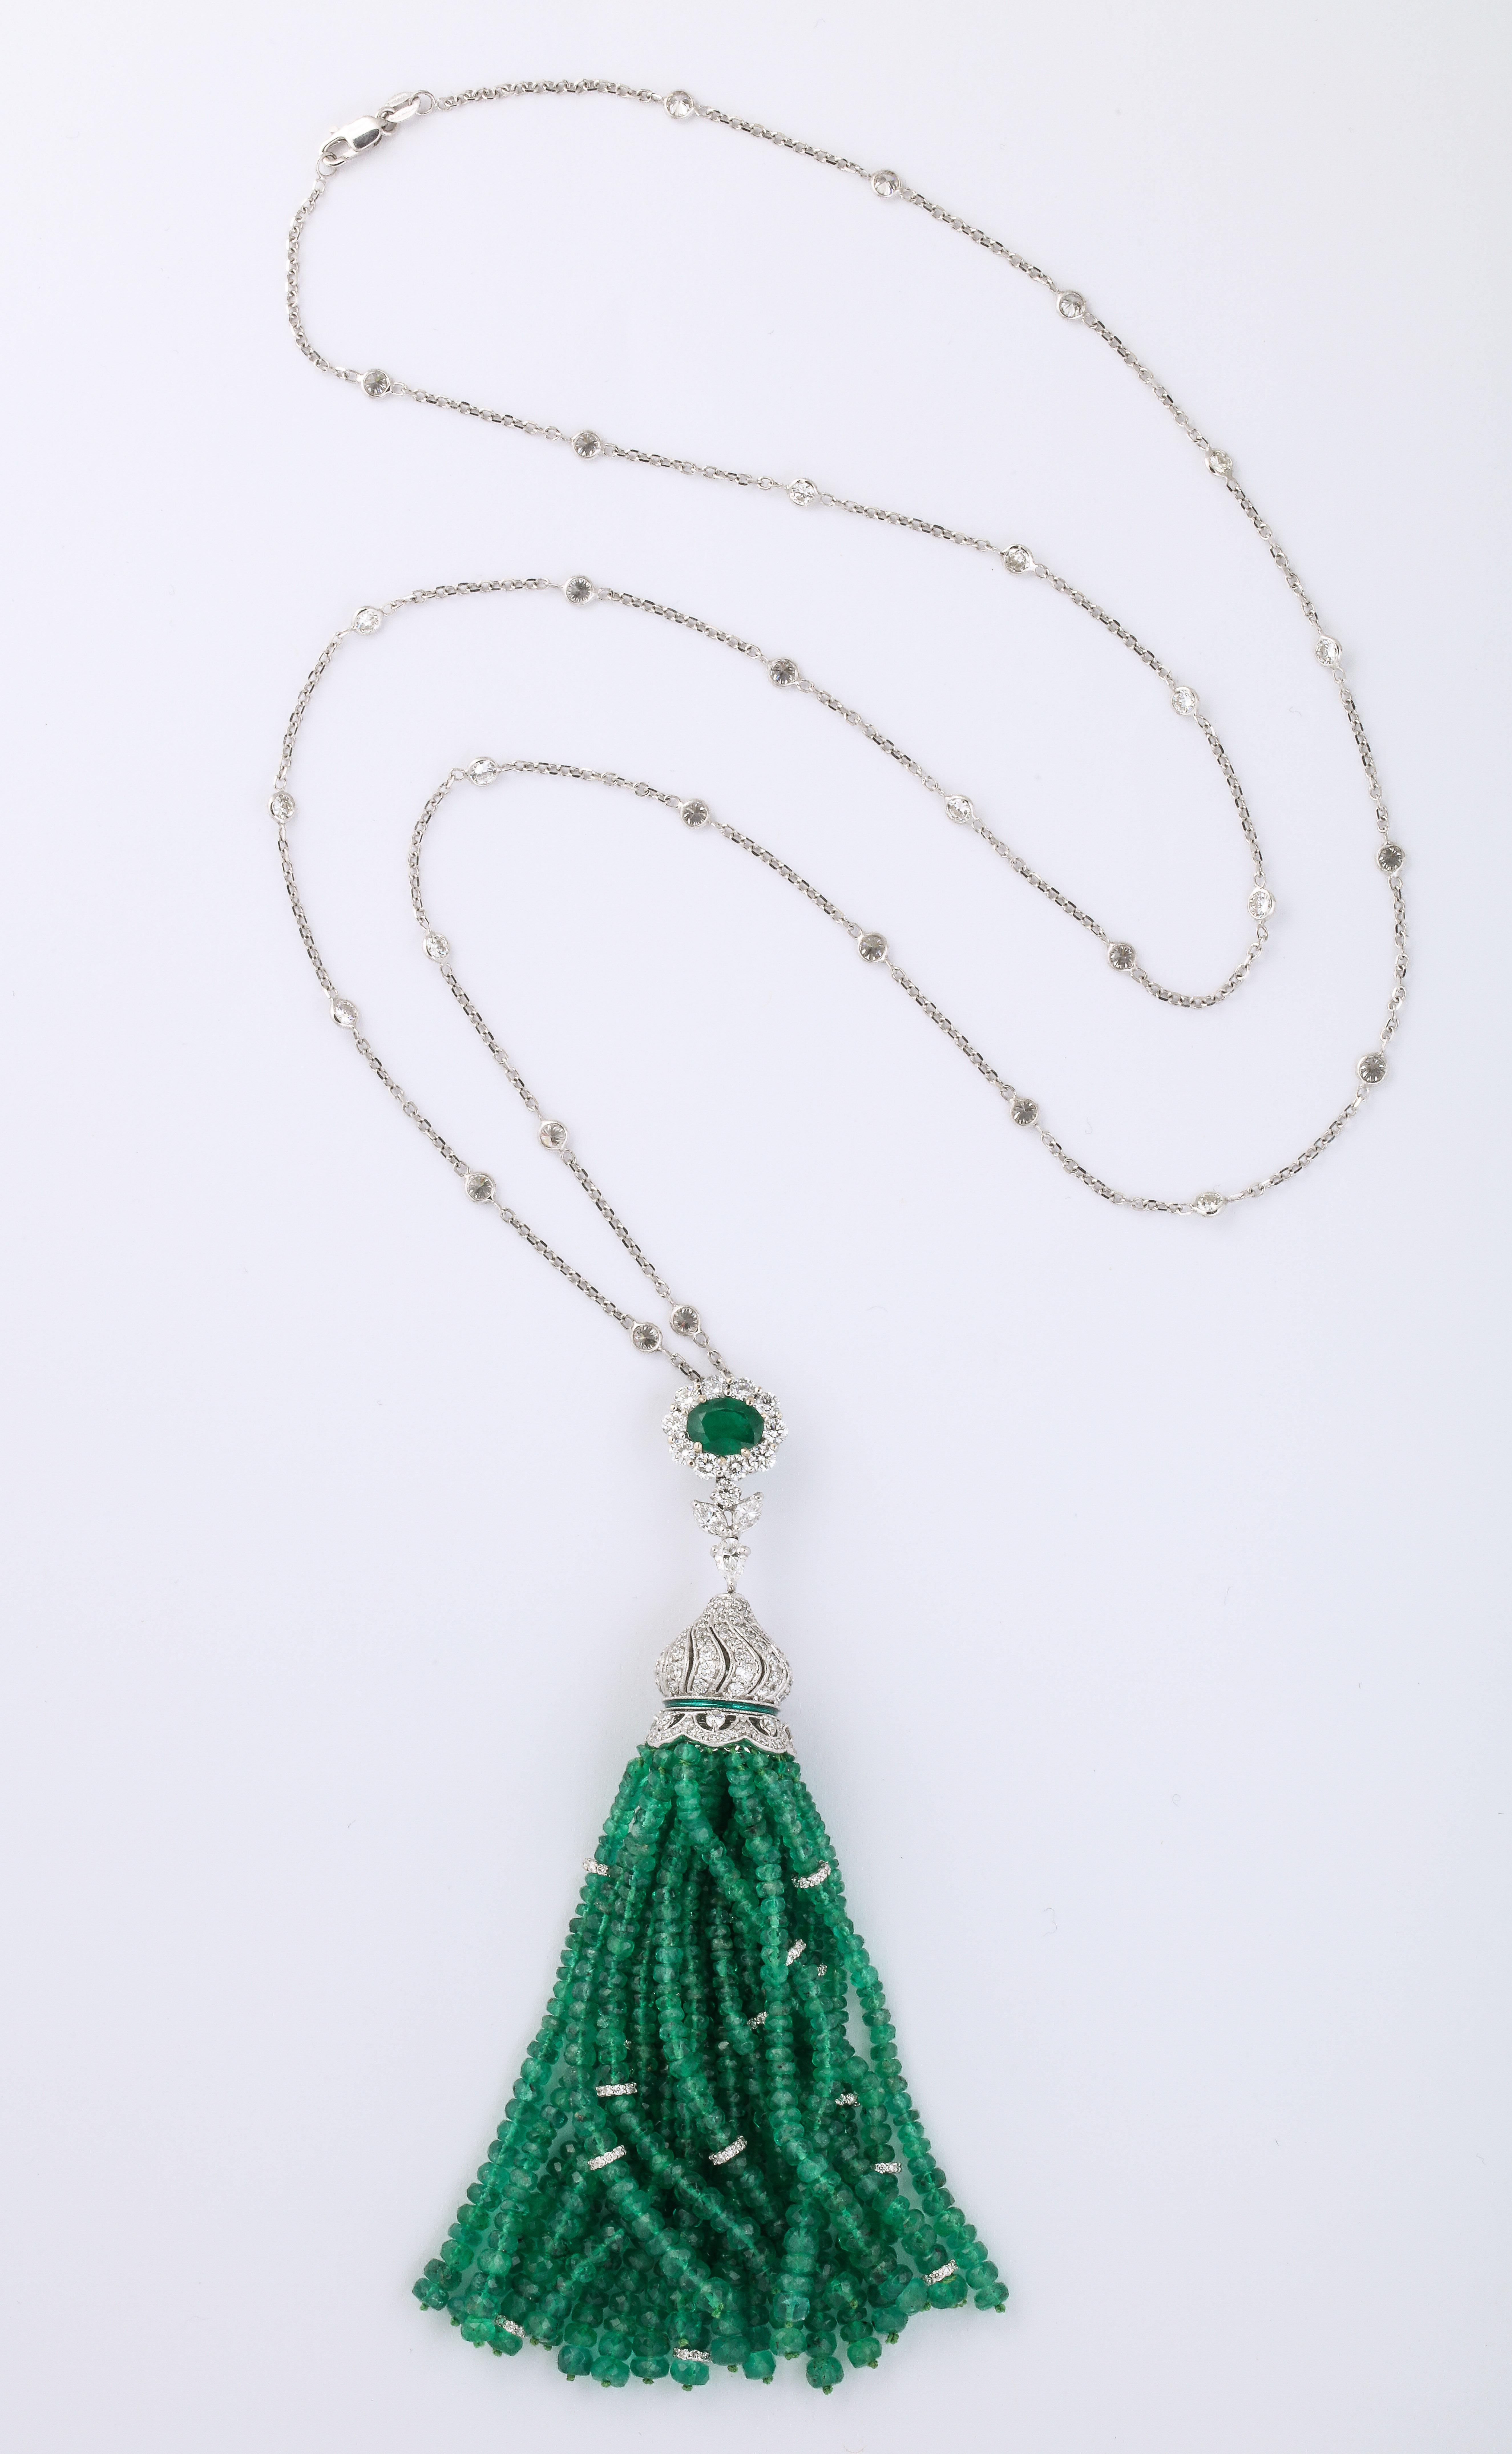 An important Emerald and Diamond Tassel Necklace

118 carats of fine Emerald and 8.33 carats of white round brilliant diamonds. 

30 inch removable diamond by yard chain, set in white gold. The tassel measures 4 inches in length. 

A fabulous piece